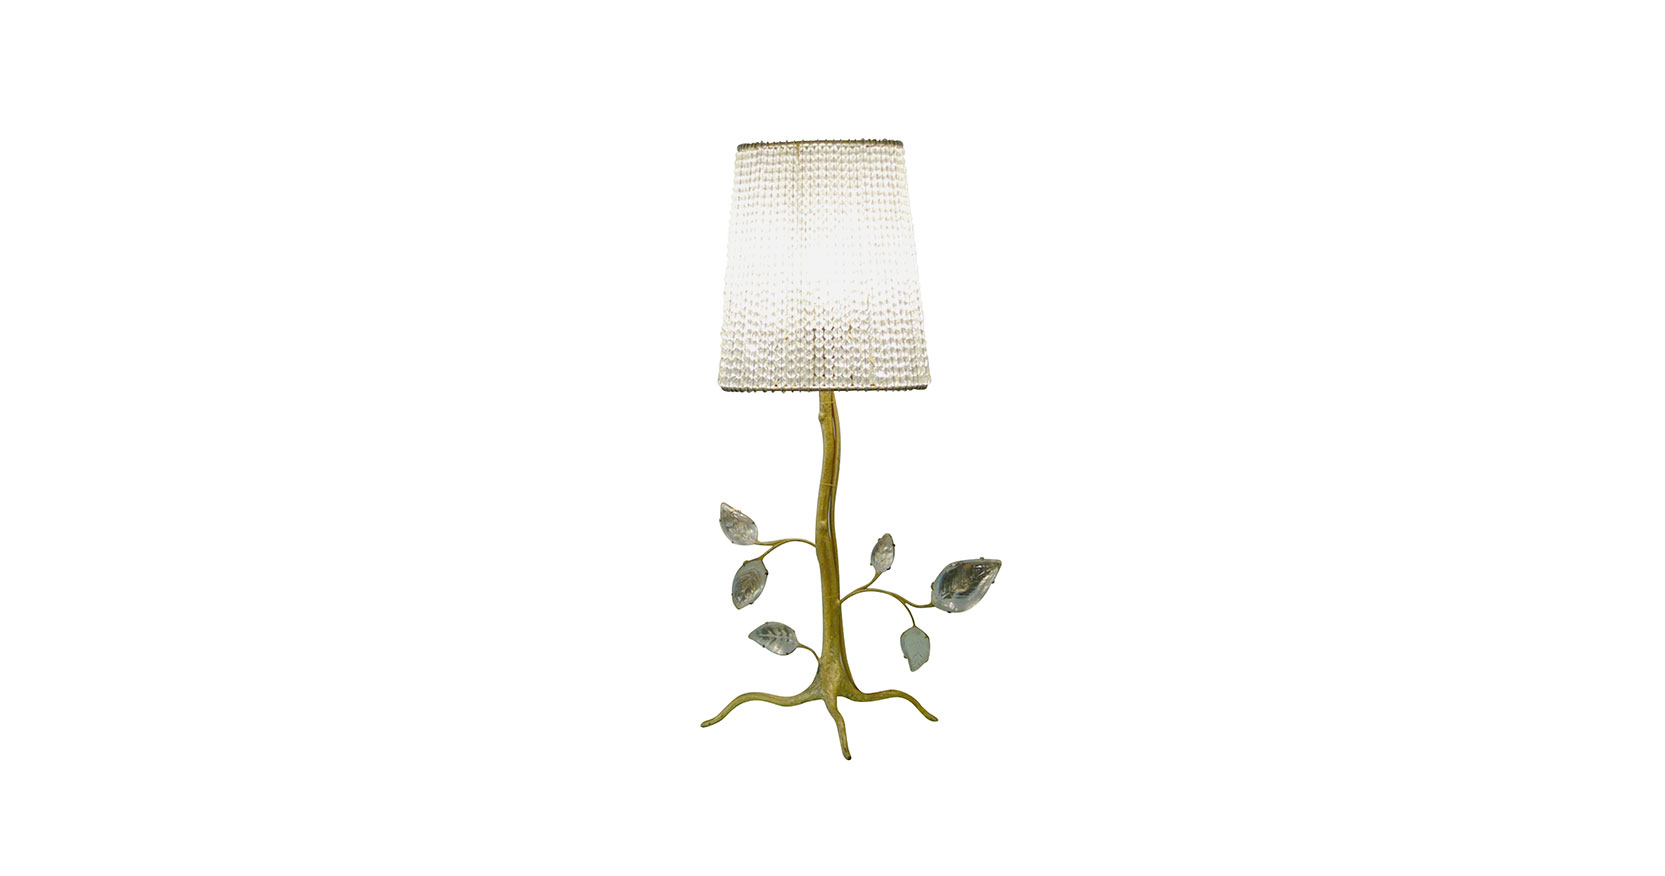 Garouste Bonettti, small bronze lamp gilded with gold leaf in the form of a little tree with crystal leaves and crystal bead lampshade.